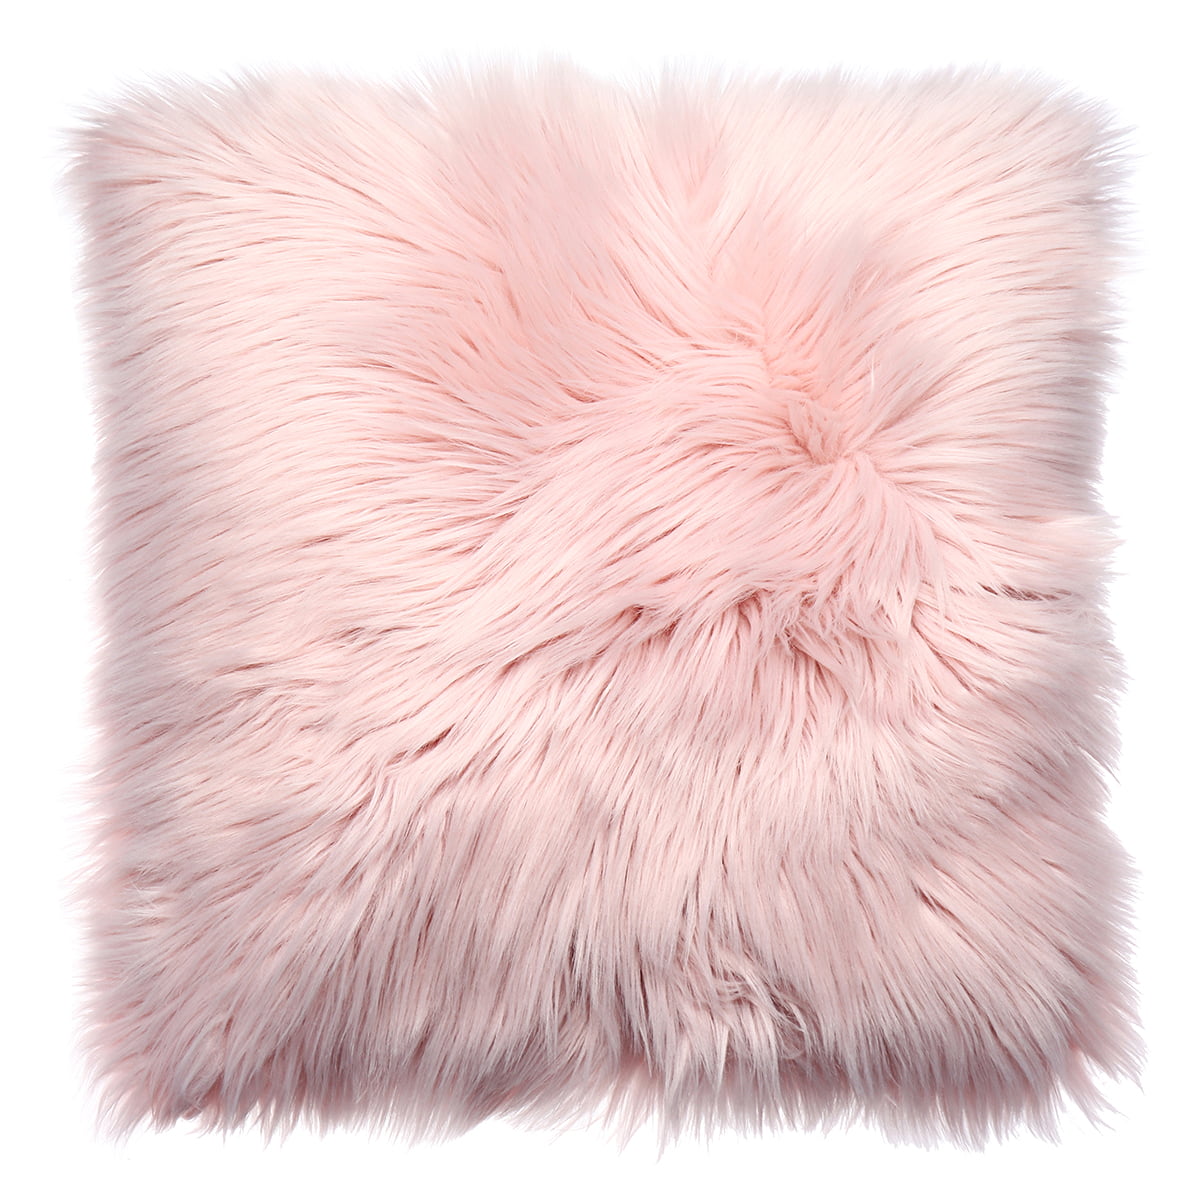 Details about   Luxury FLUFFY Cushion Covers Furry Scatter Decorative Soft Pillow Case Plush 